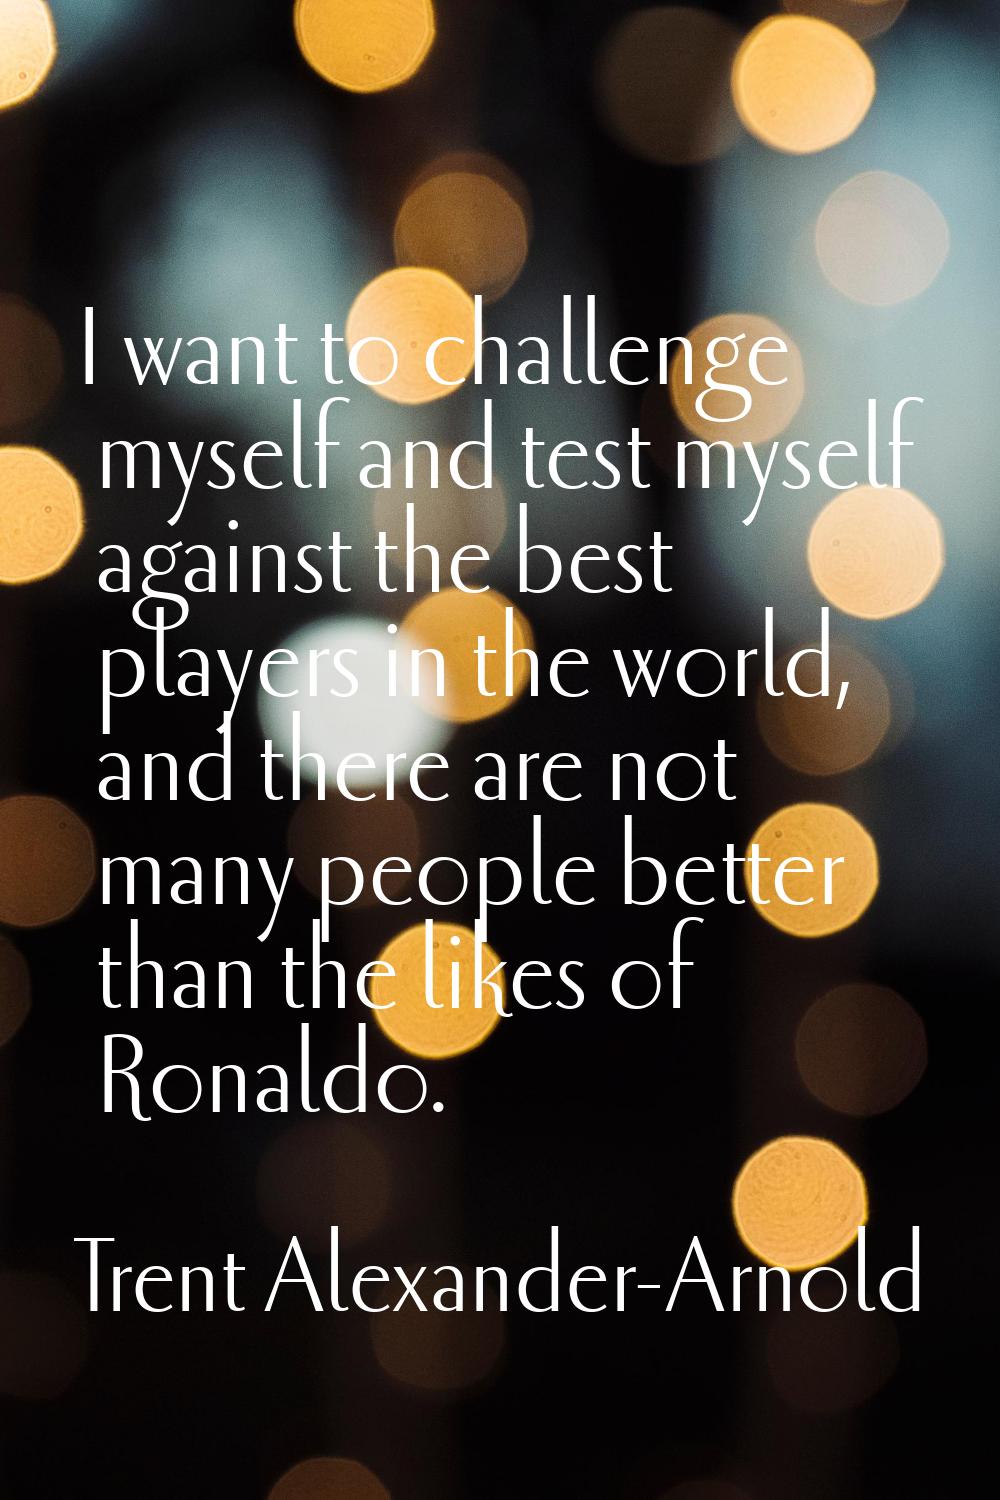 I want to challenge myself and test myself against the best players in the world, and there are not